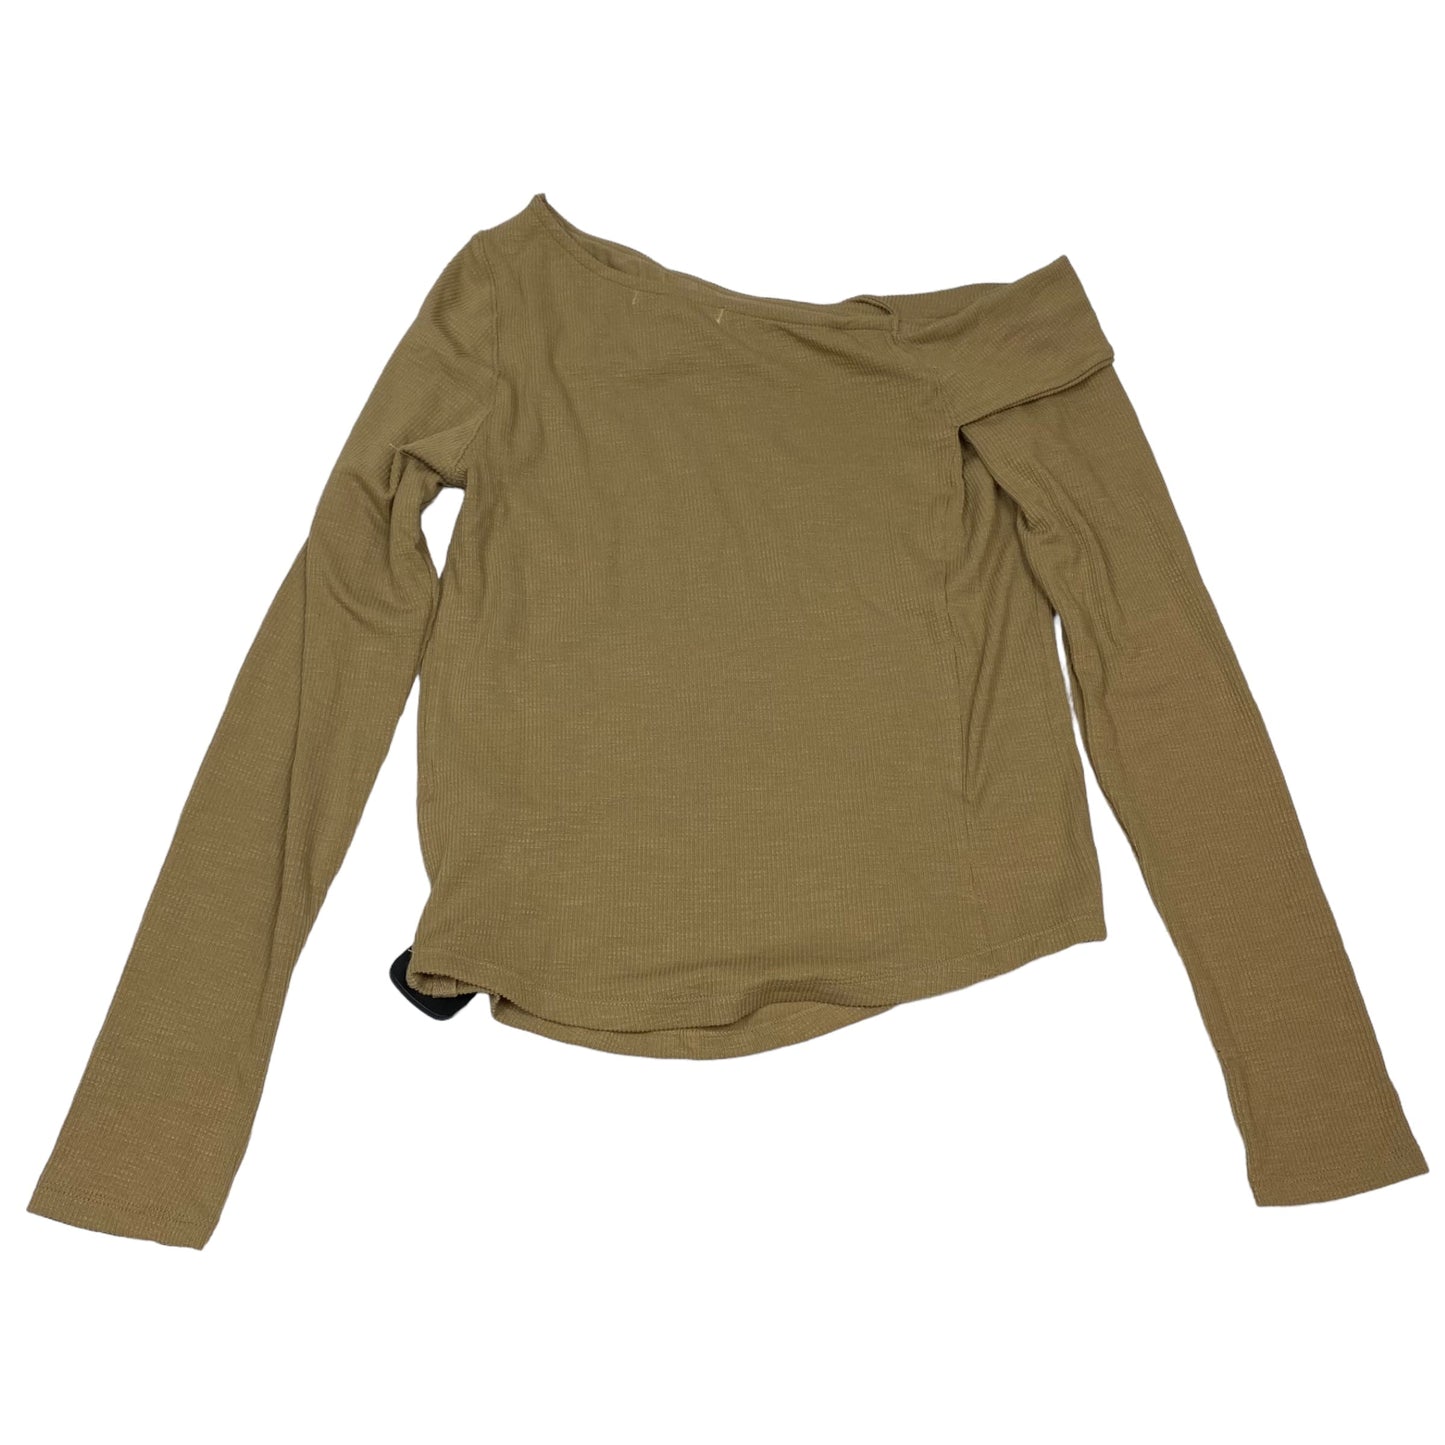 Tan Top Long Sleeve We The Free, Size Xl